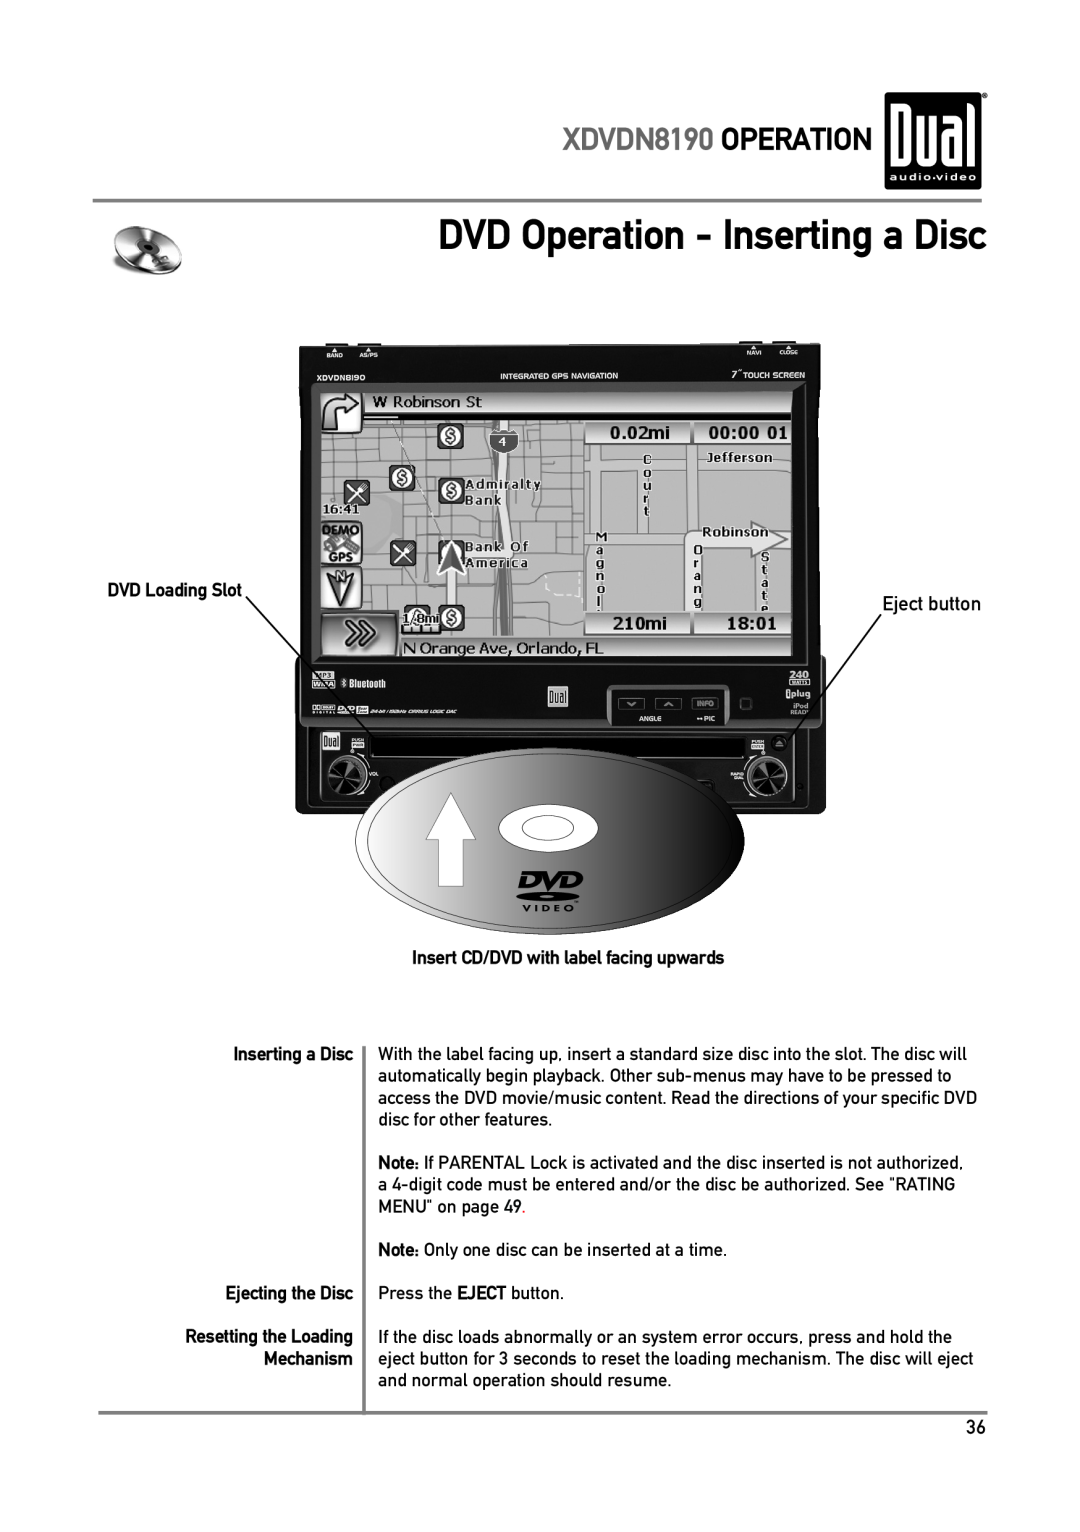 Dual DVD Operation - Inserting a Disc, XDVDN8190 OPERATION, DVD Loading Slot, Insert CD/DVD with label facing upwards 